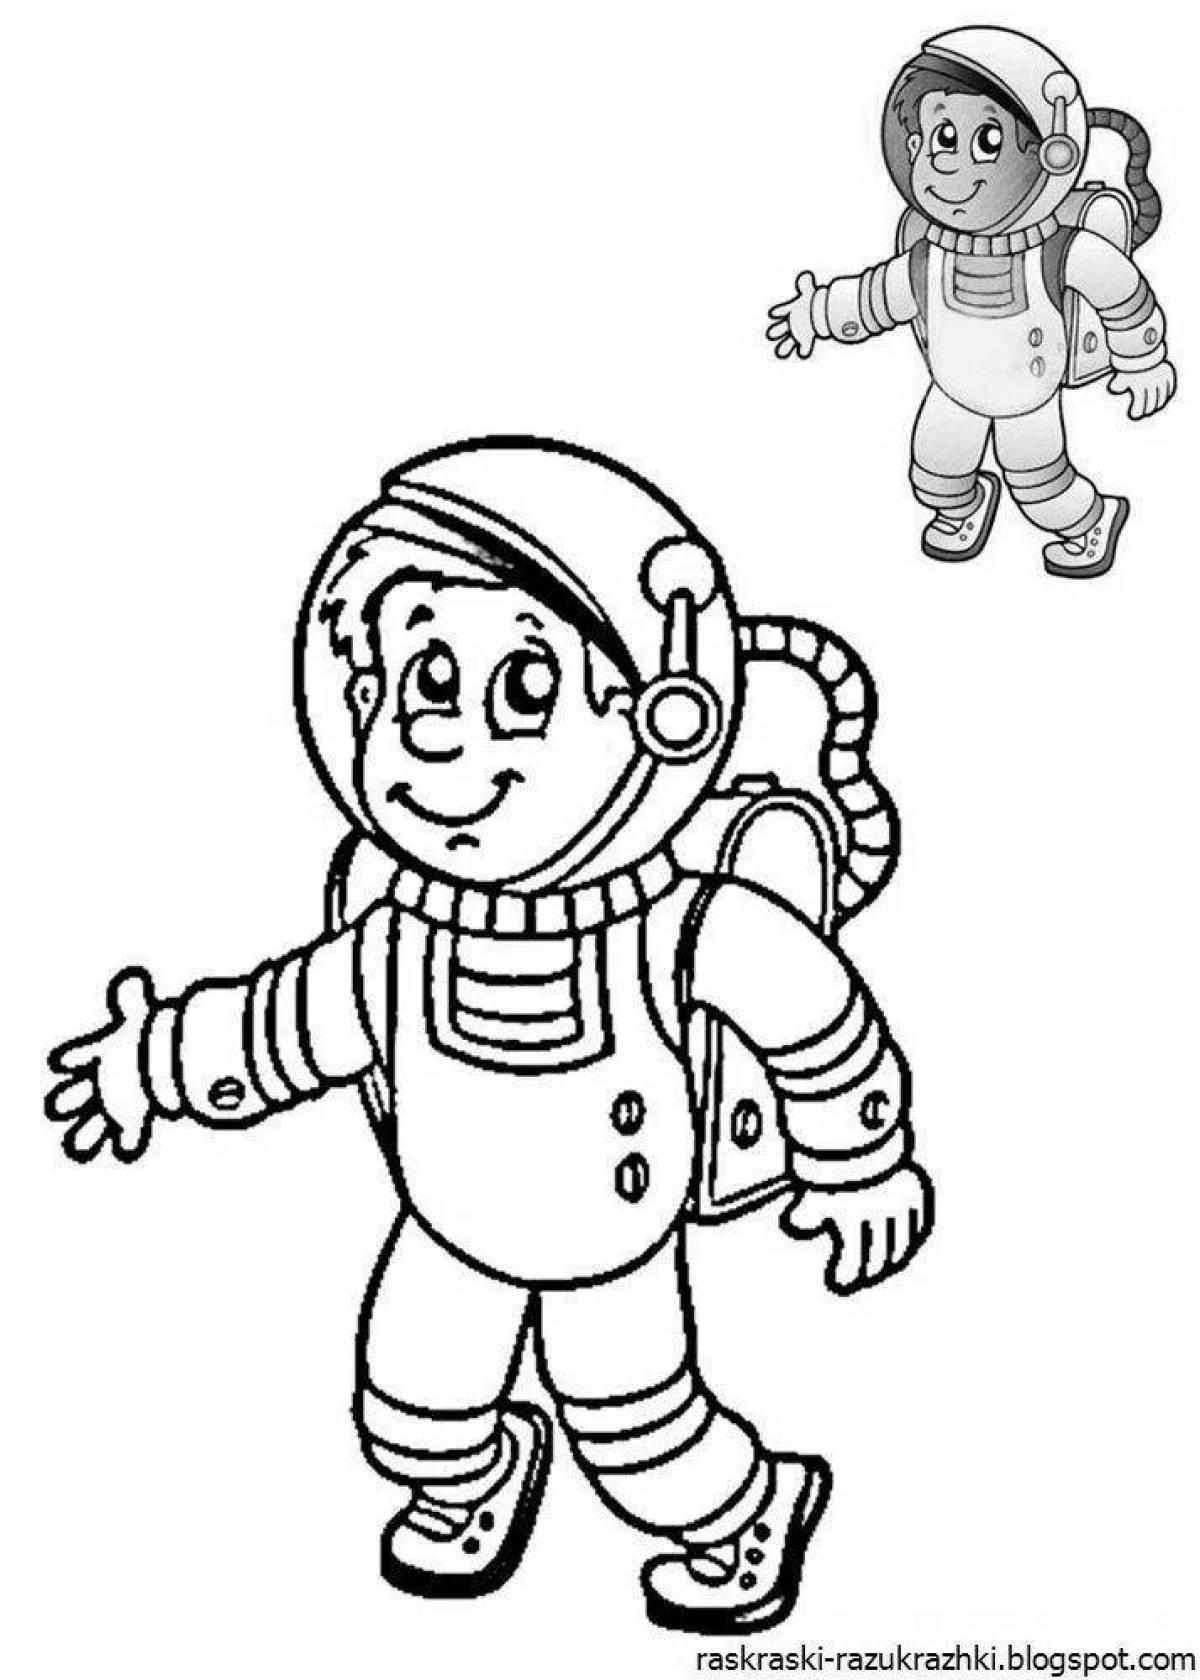 Gorgeous astronaut coloring pages for kids